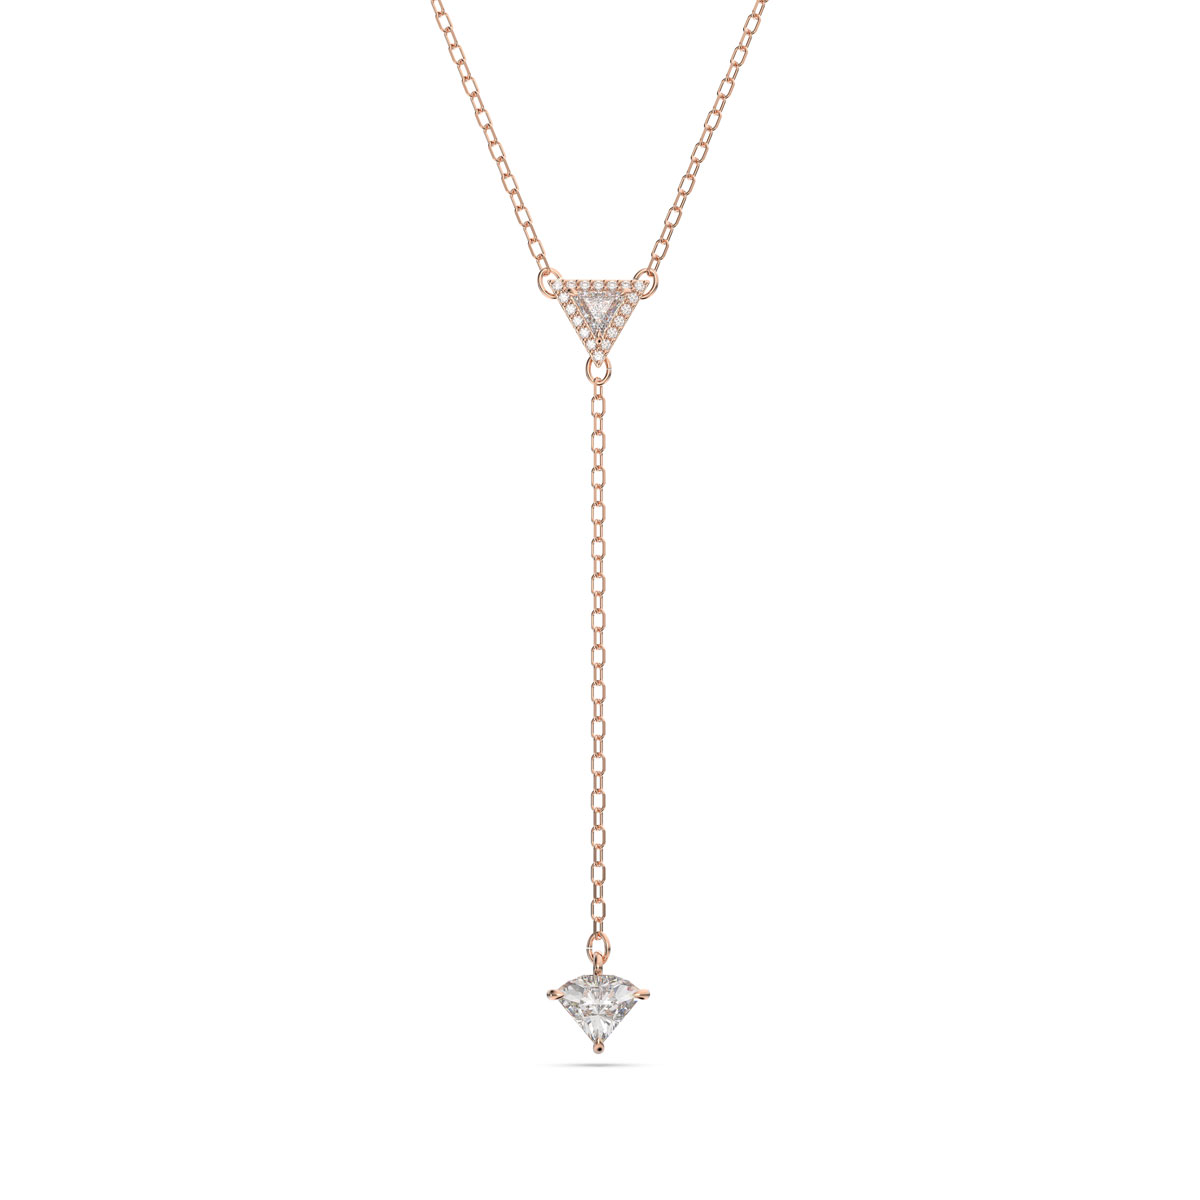 Swarovski Triangle Cut Crystal and Rose Gold Ortyx Y Necklace